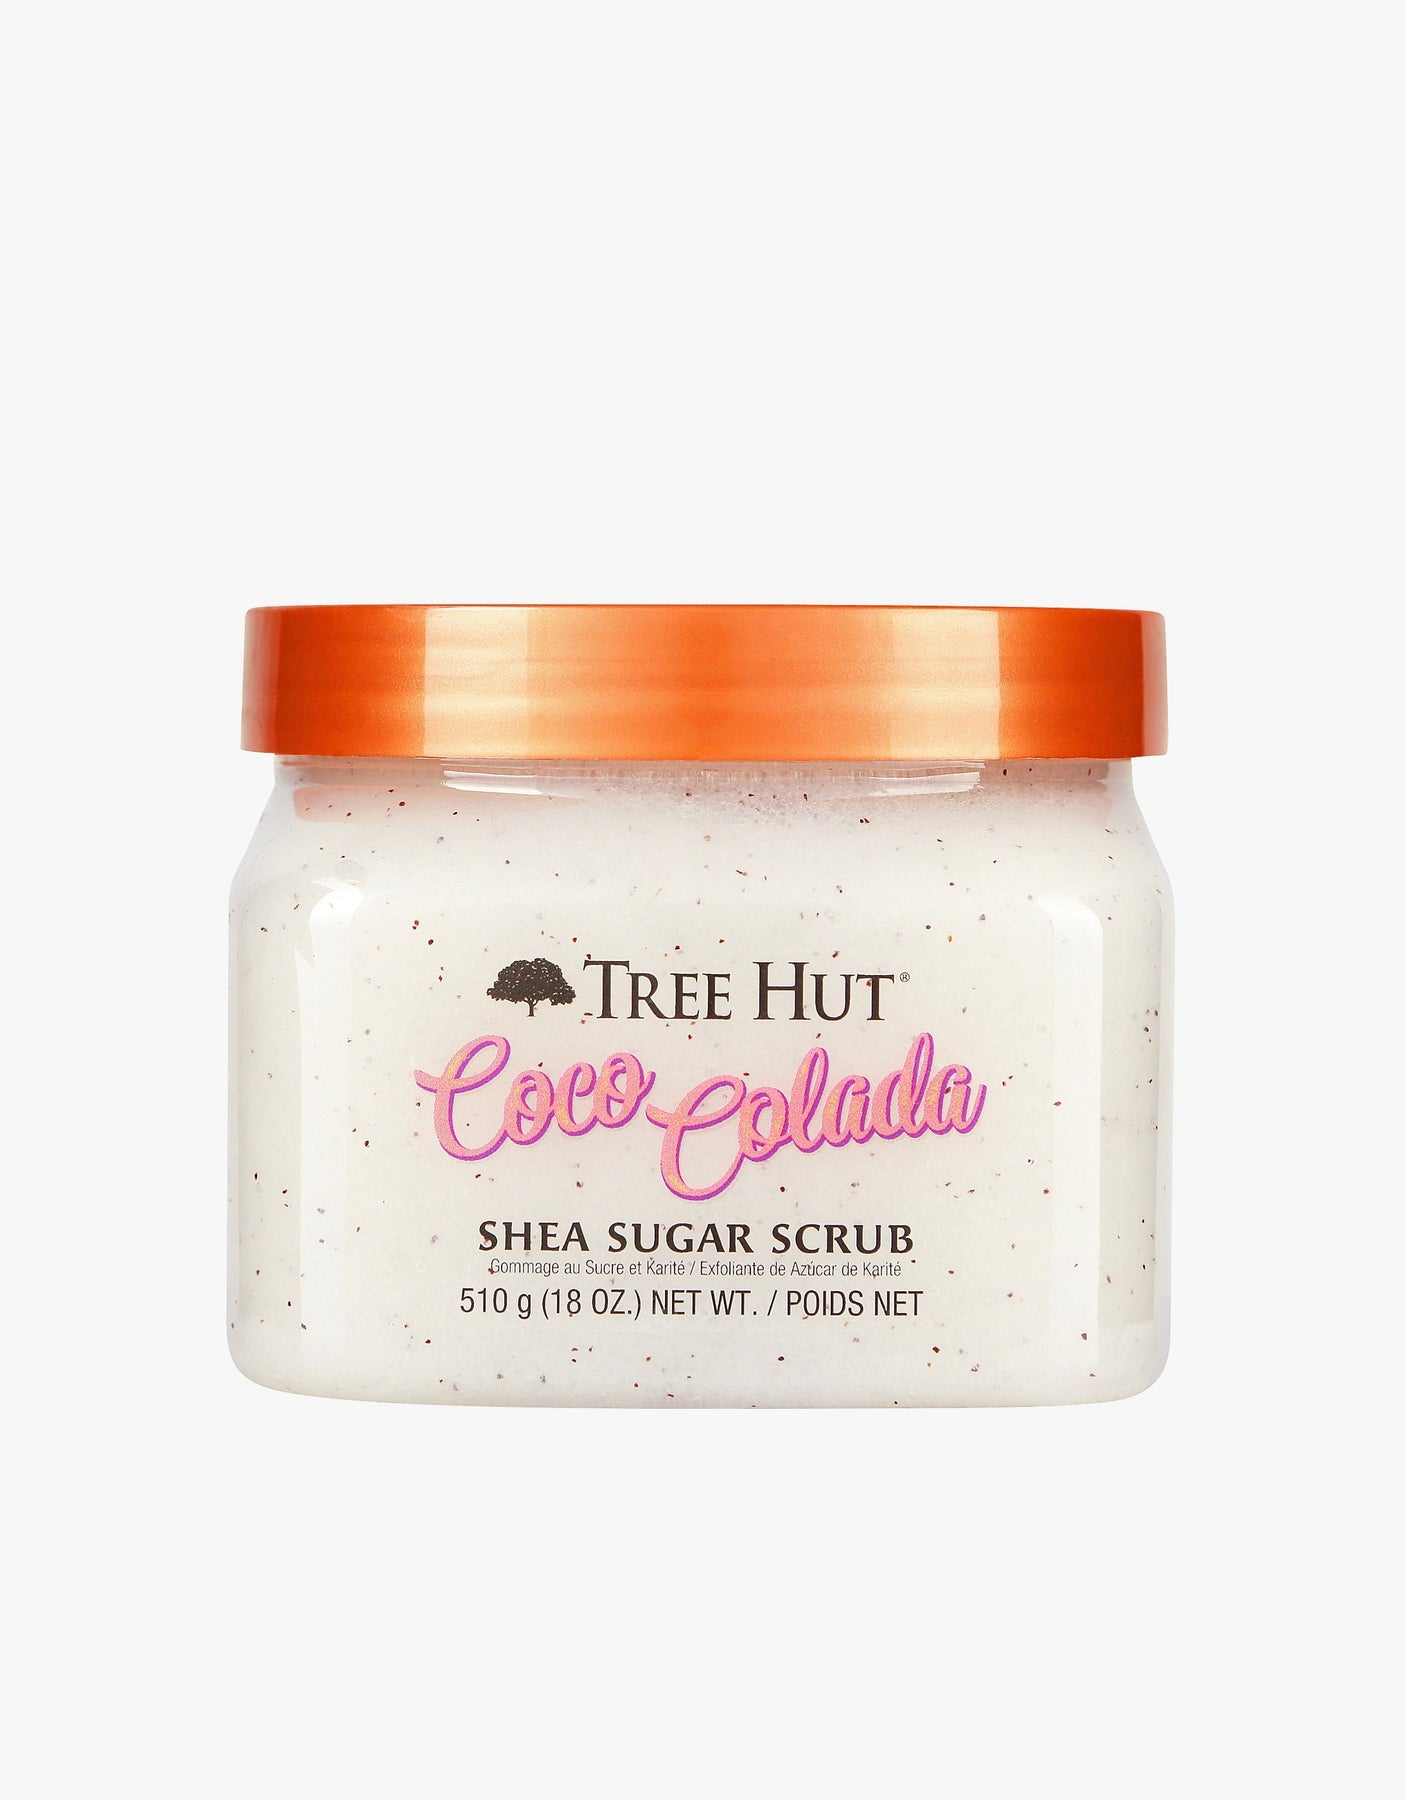 Tree Hut Shea Sugar Scrub, Belize Breeze, 18 Ounce Ingredients and Reviews